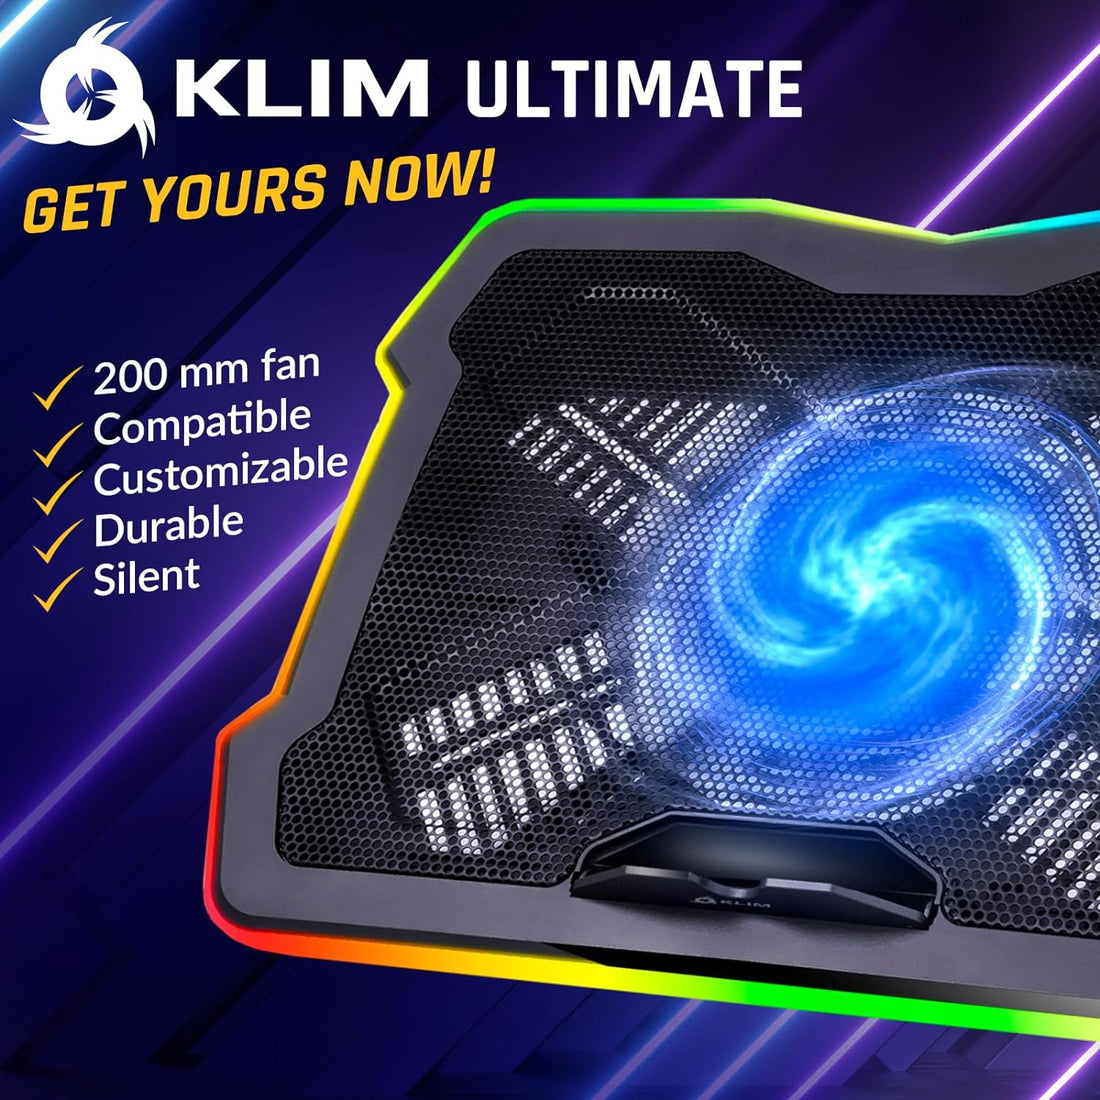 KLIM Ultimate + RGB Laptop Cooling Pad with LED Rim + Gaming Laptop Cooler + USB Powered Fan + Very Stable and Silent Laptop Stand + Compatible up to 17" + for PC Mac PS4 Xbox One + New 2022